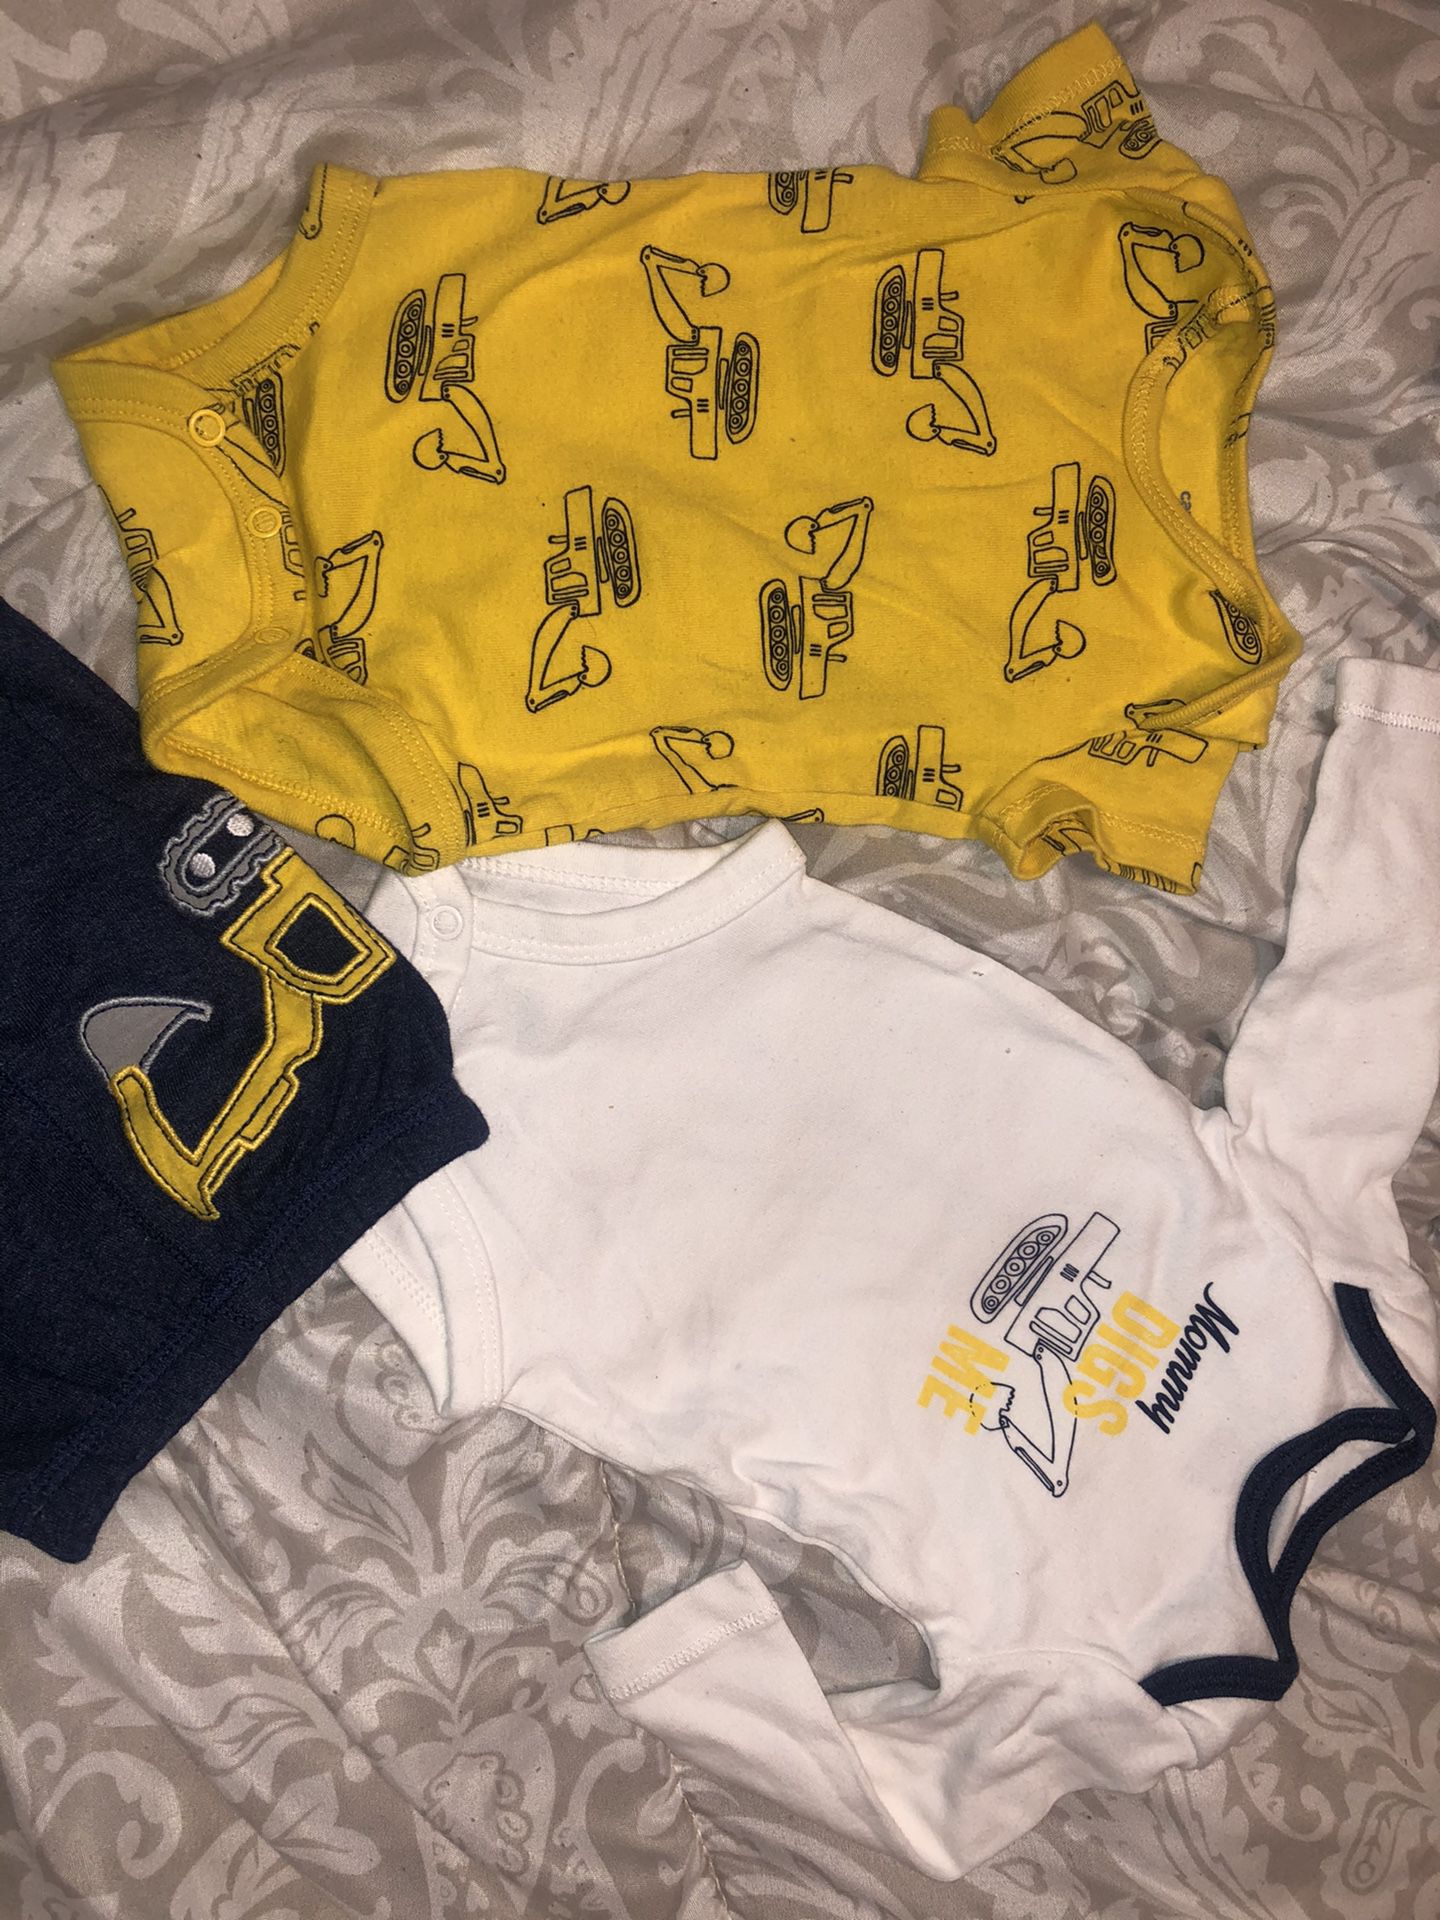 Baby trucks outfit